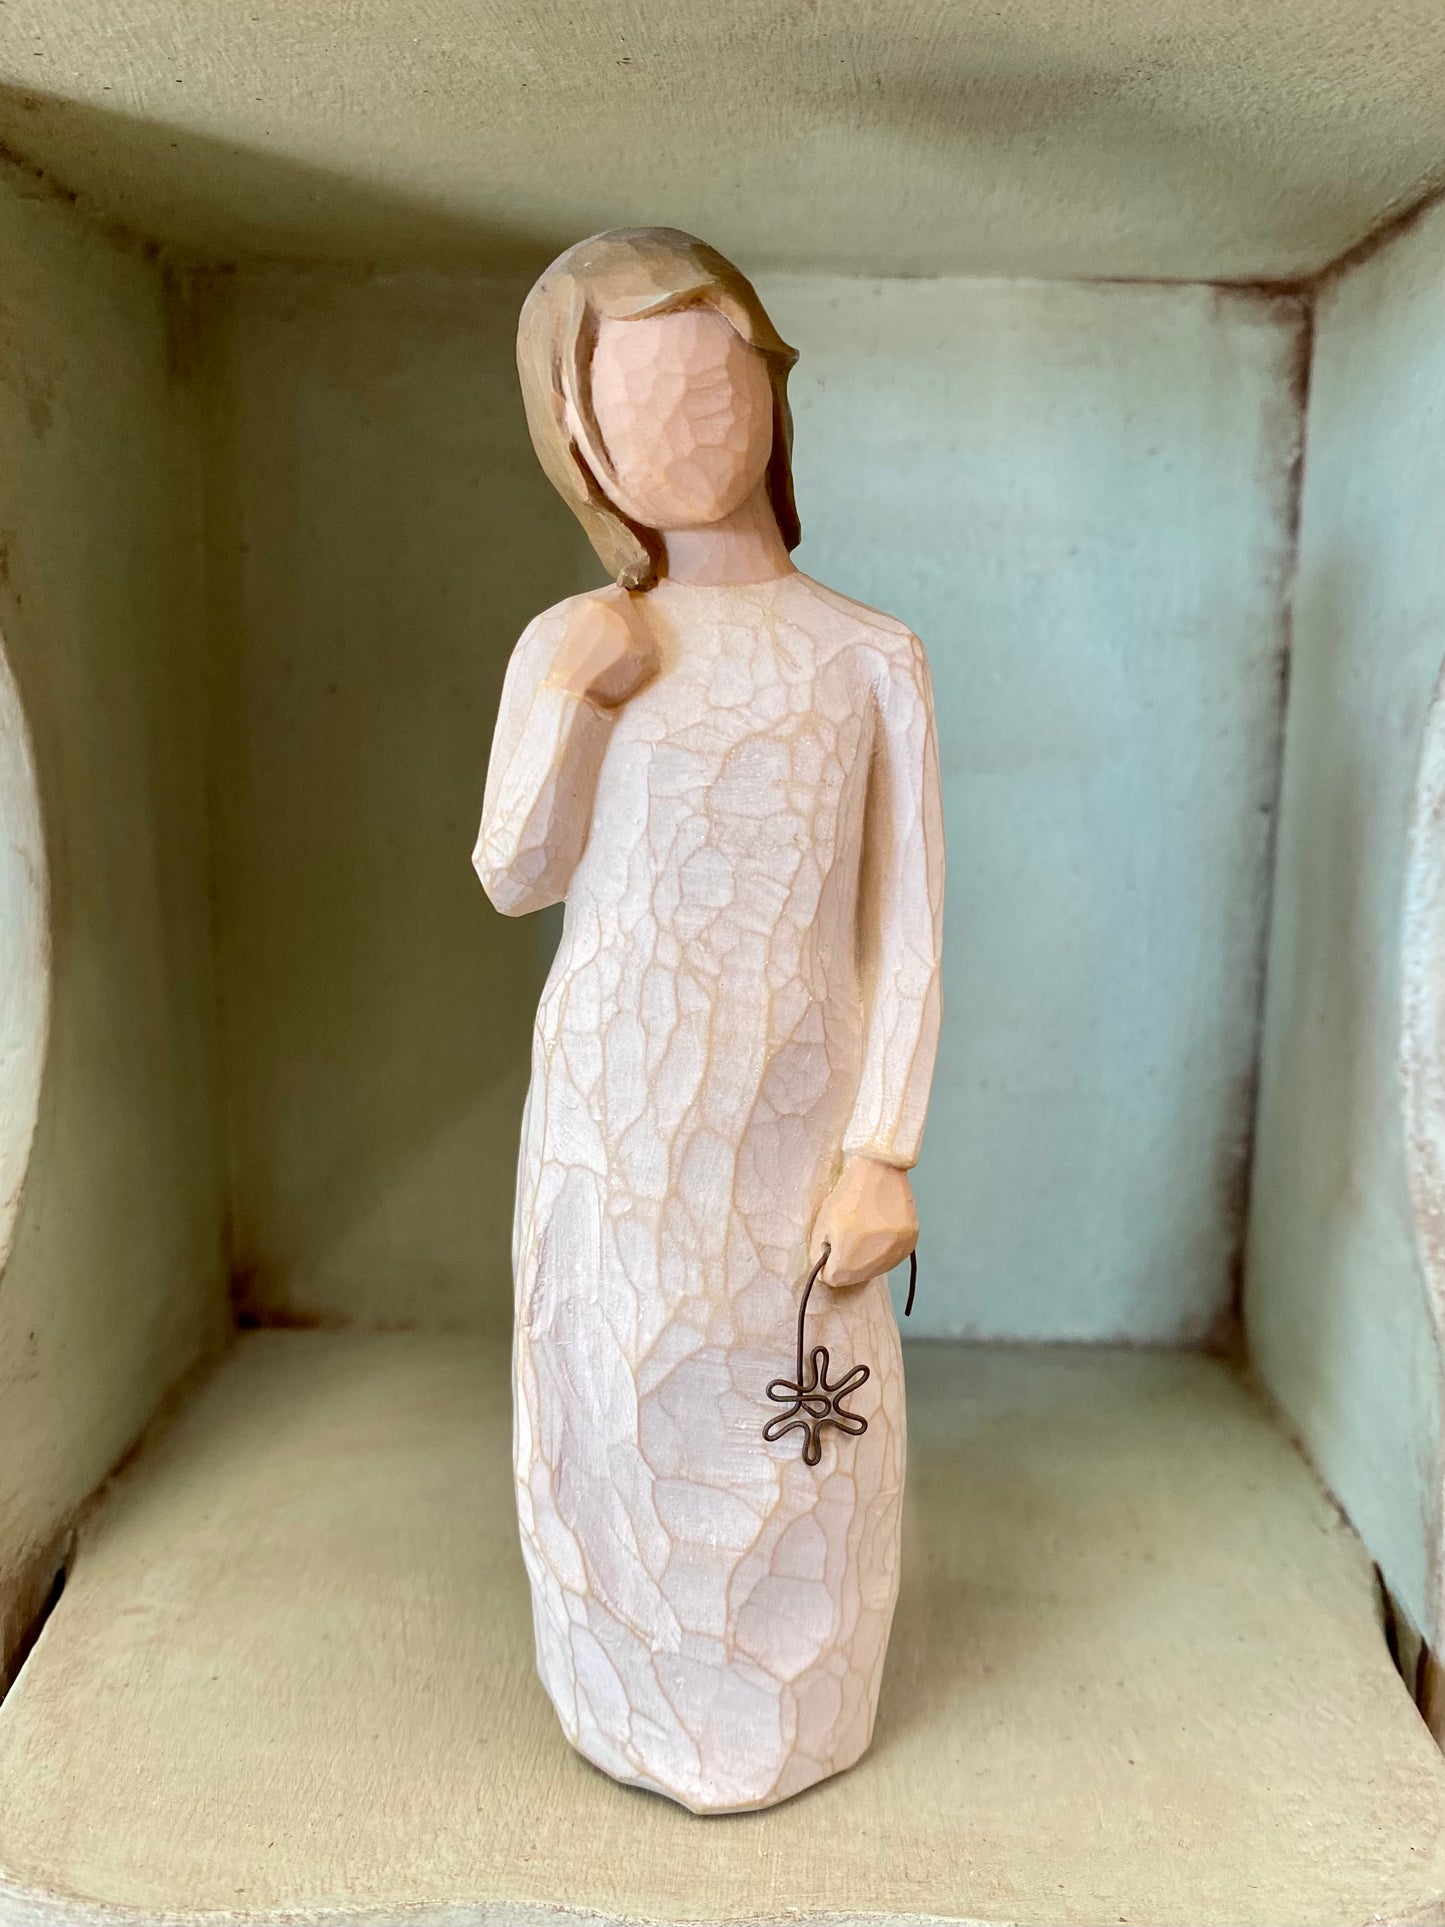 Willow Tree “Remember” Figurine